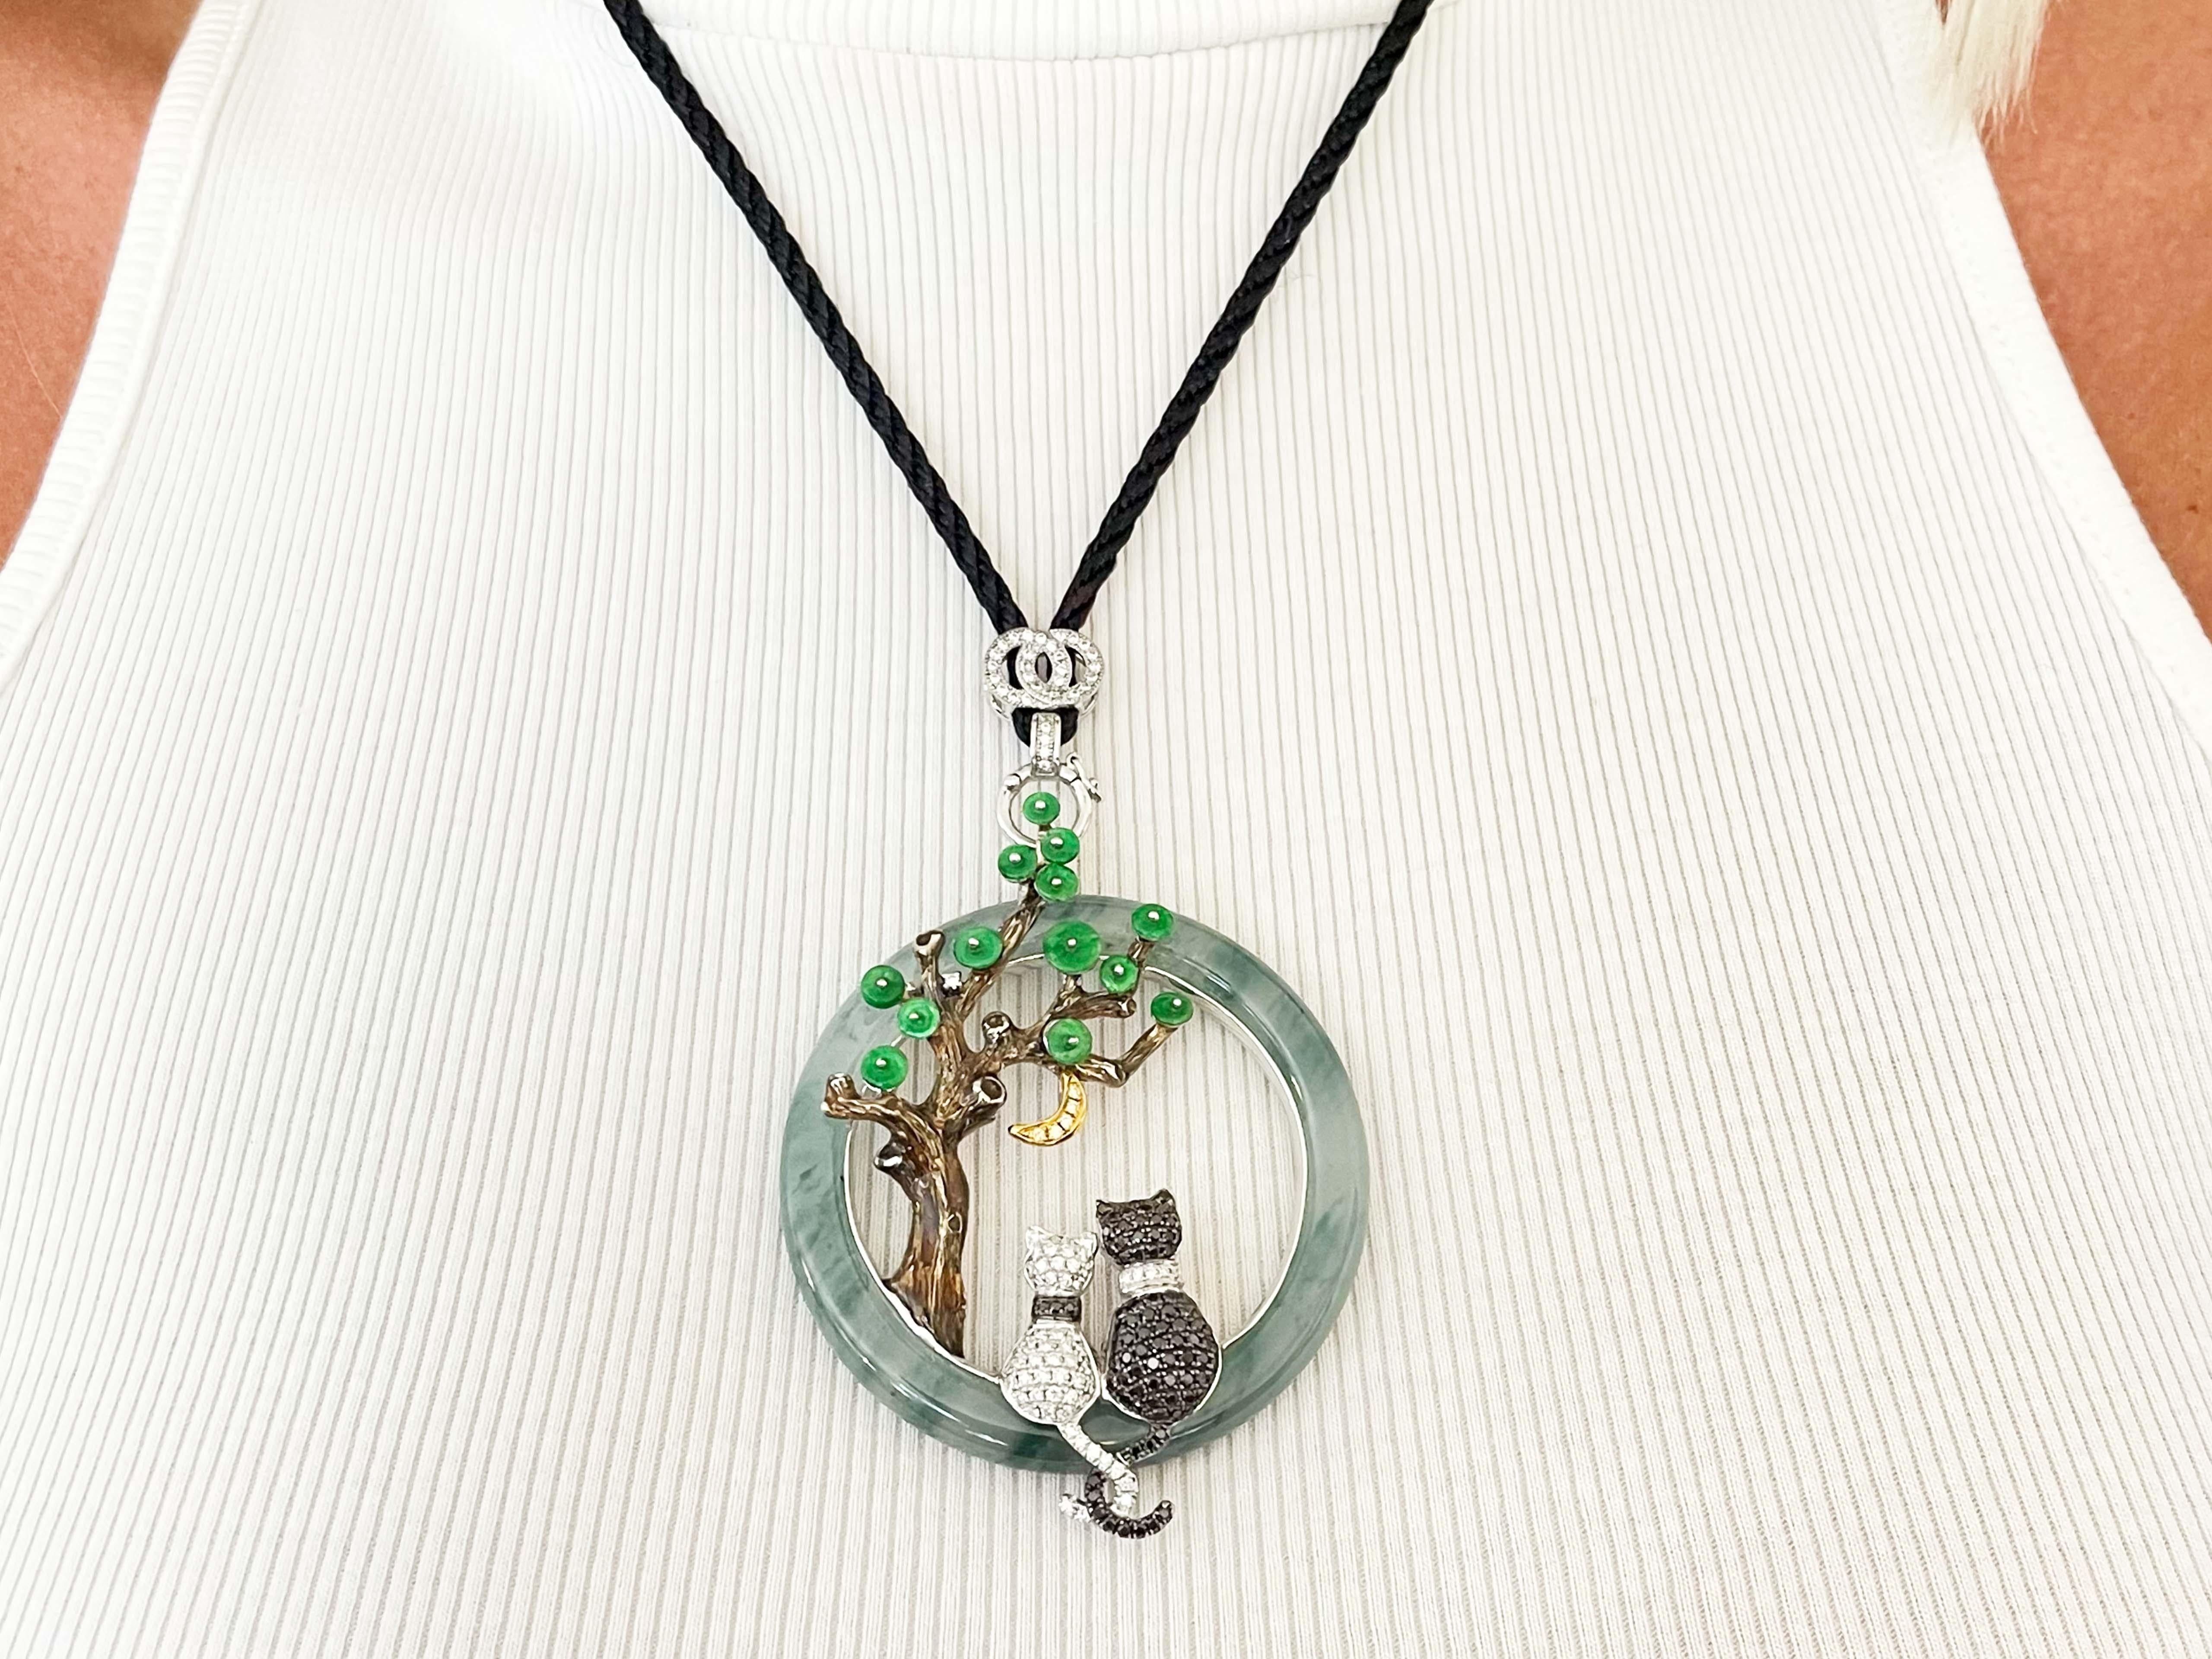 This unique one-of-a-kind pendant features 0.90 carats of black diamonds and 0.55 carats of white diamonds. There is a total of 20 carats of jade featuring water jade and apple jade on the tree made with brown enamel. The moon features fancy intense